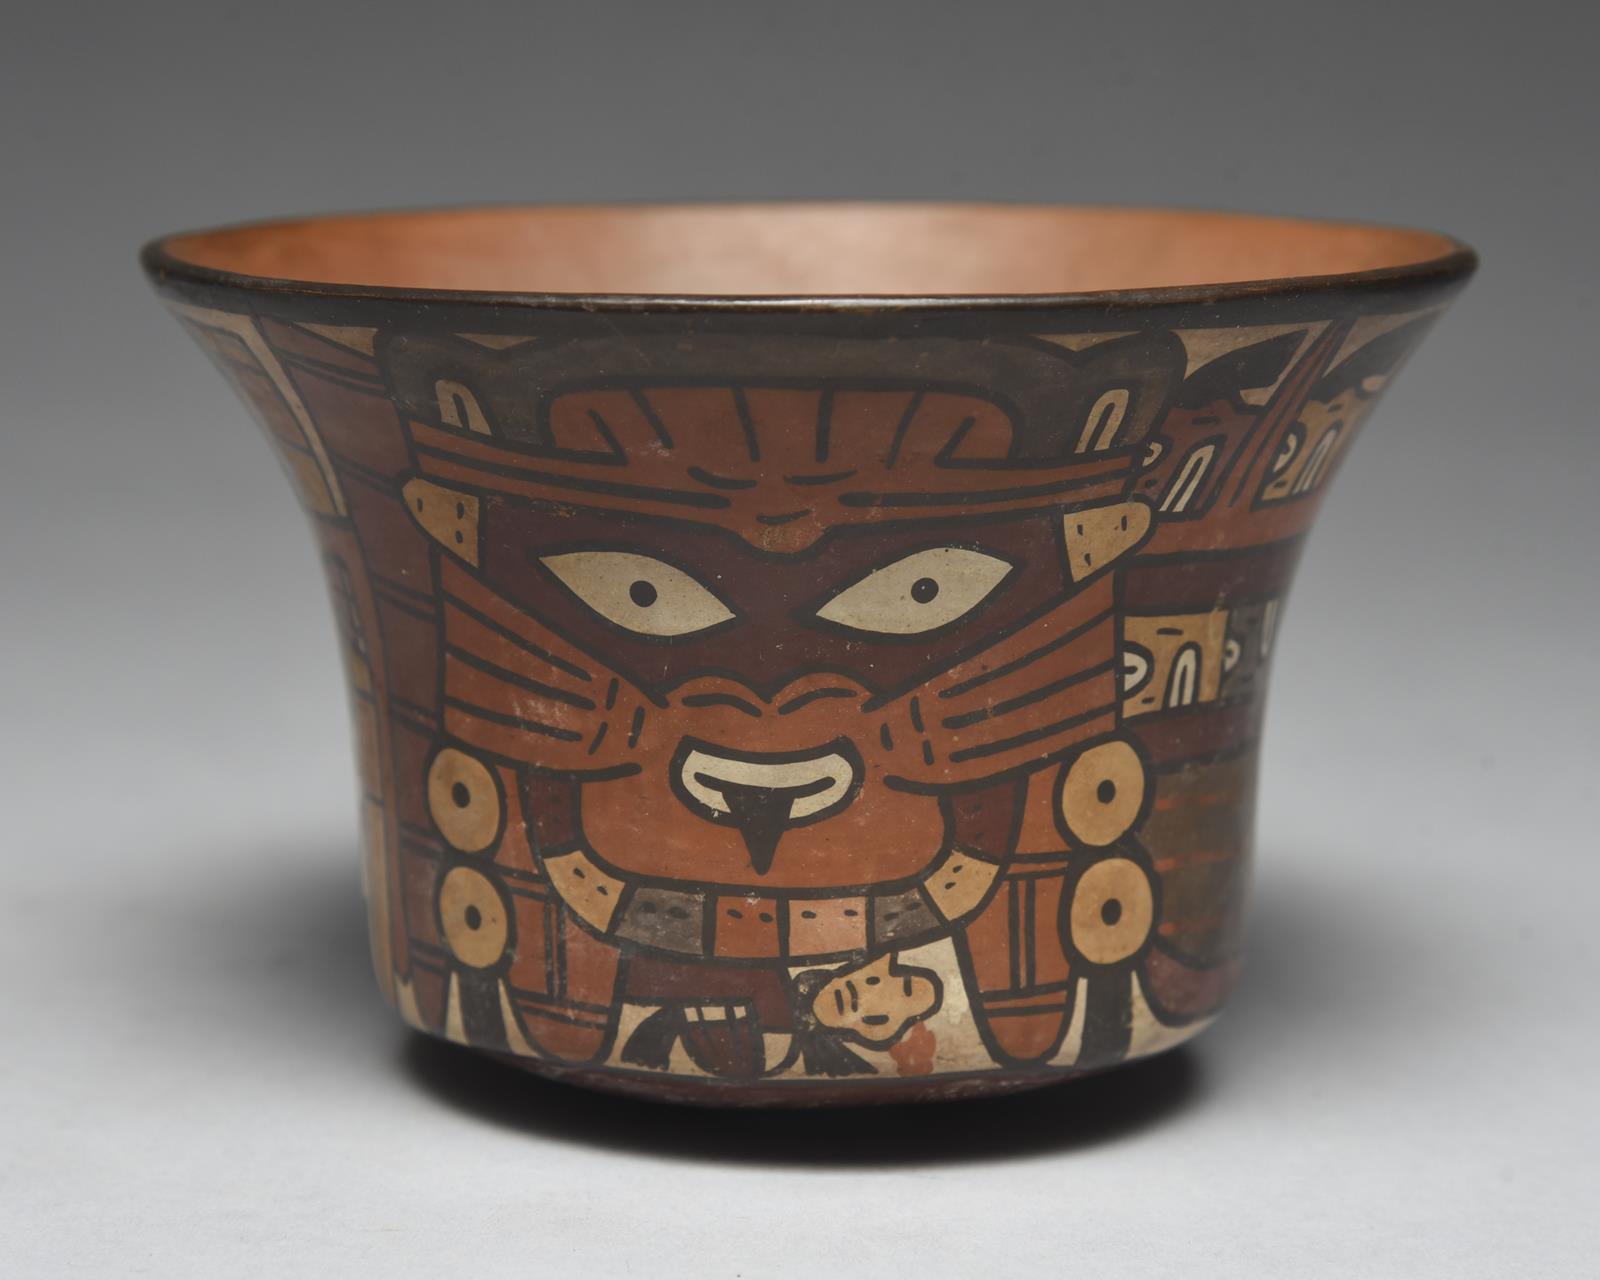 A Nazca bowl Peru, circa 200 - 600 AD pottery, painted a mythical flying being with trophy heads